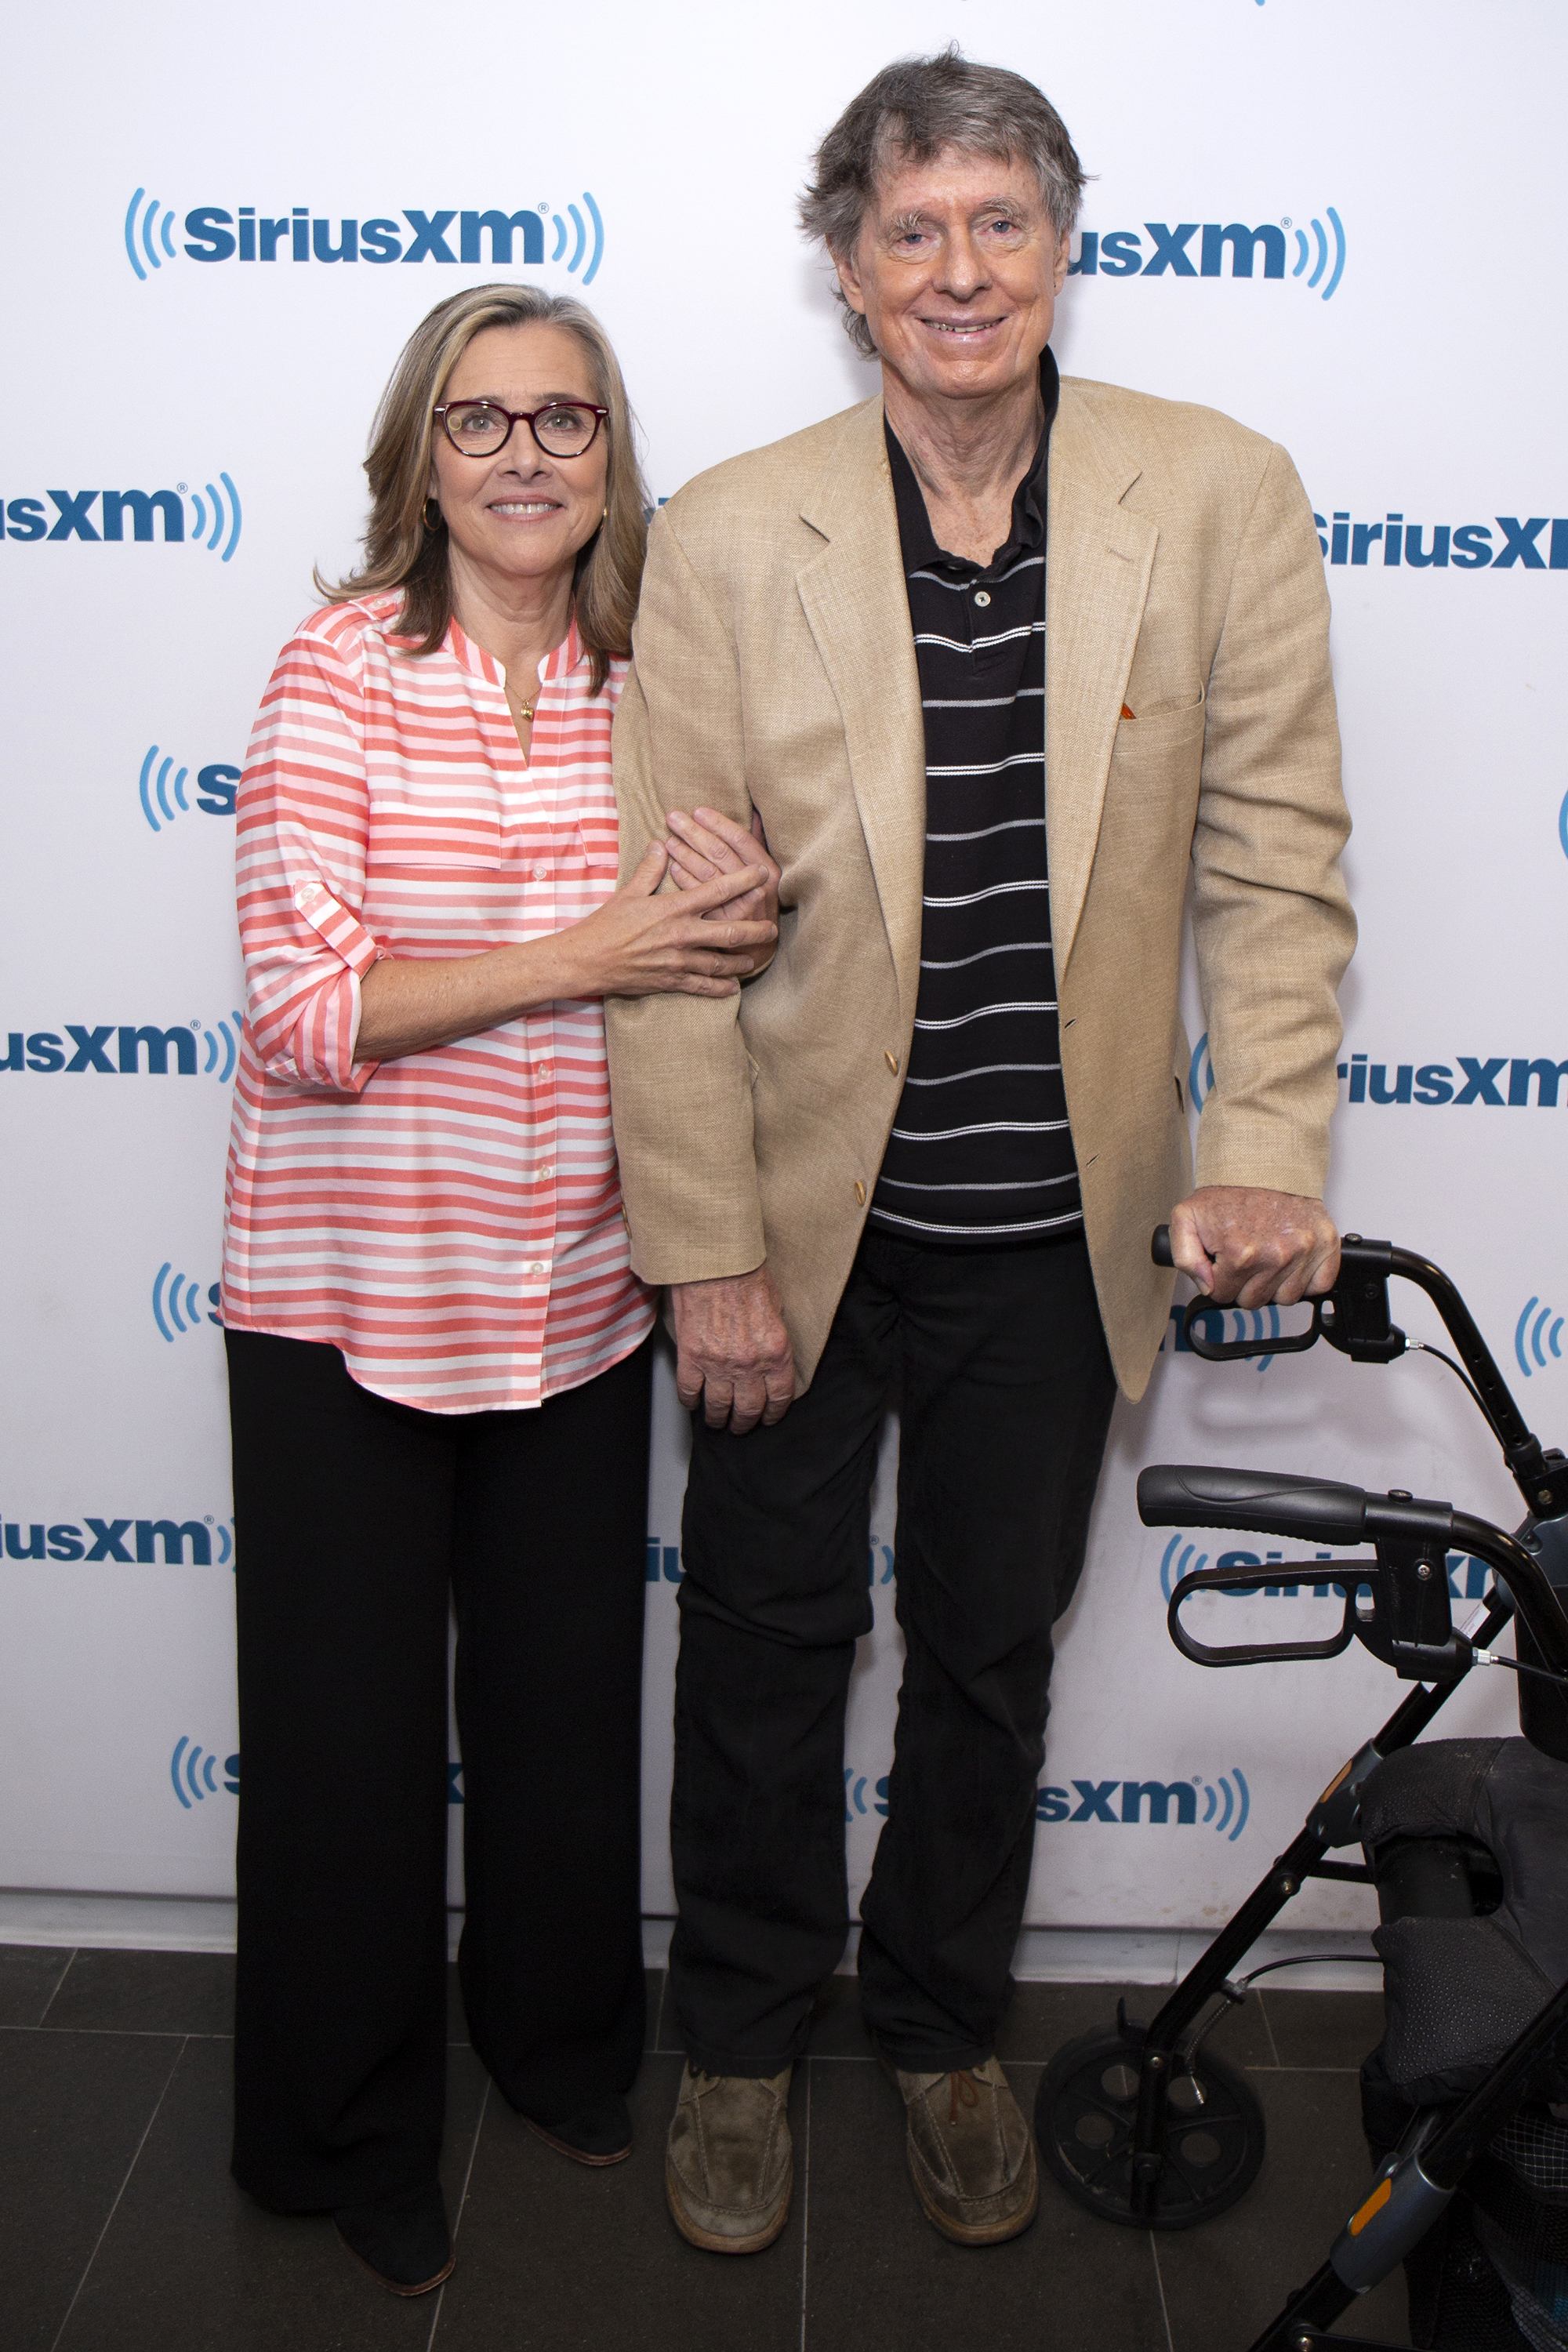 Meredith Vieira and Richard Cohen visit SiriusXM Studios in New York City on May 7, 2018 | Source: Getty Images